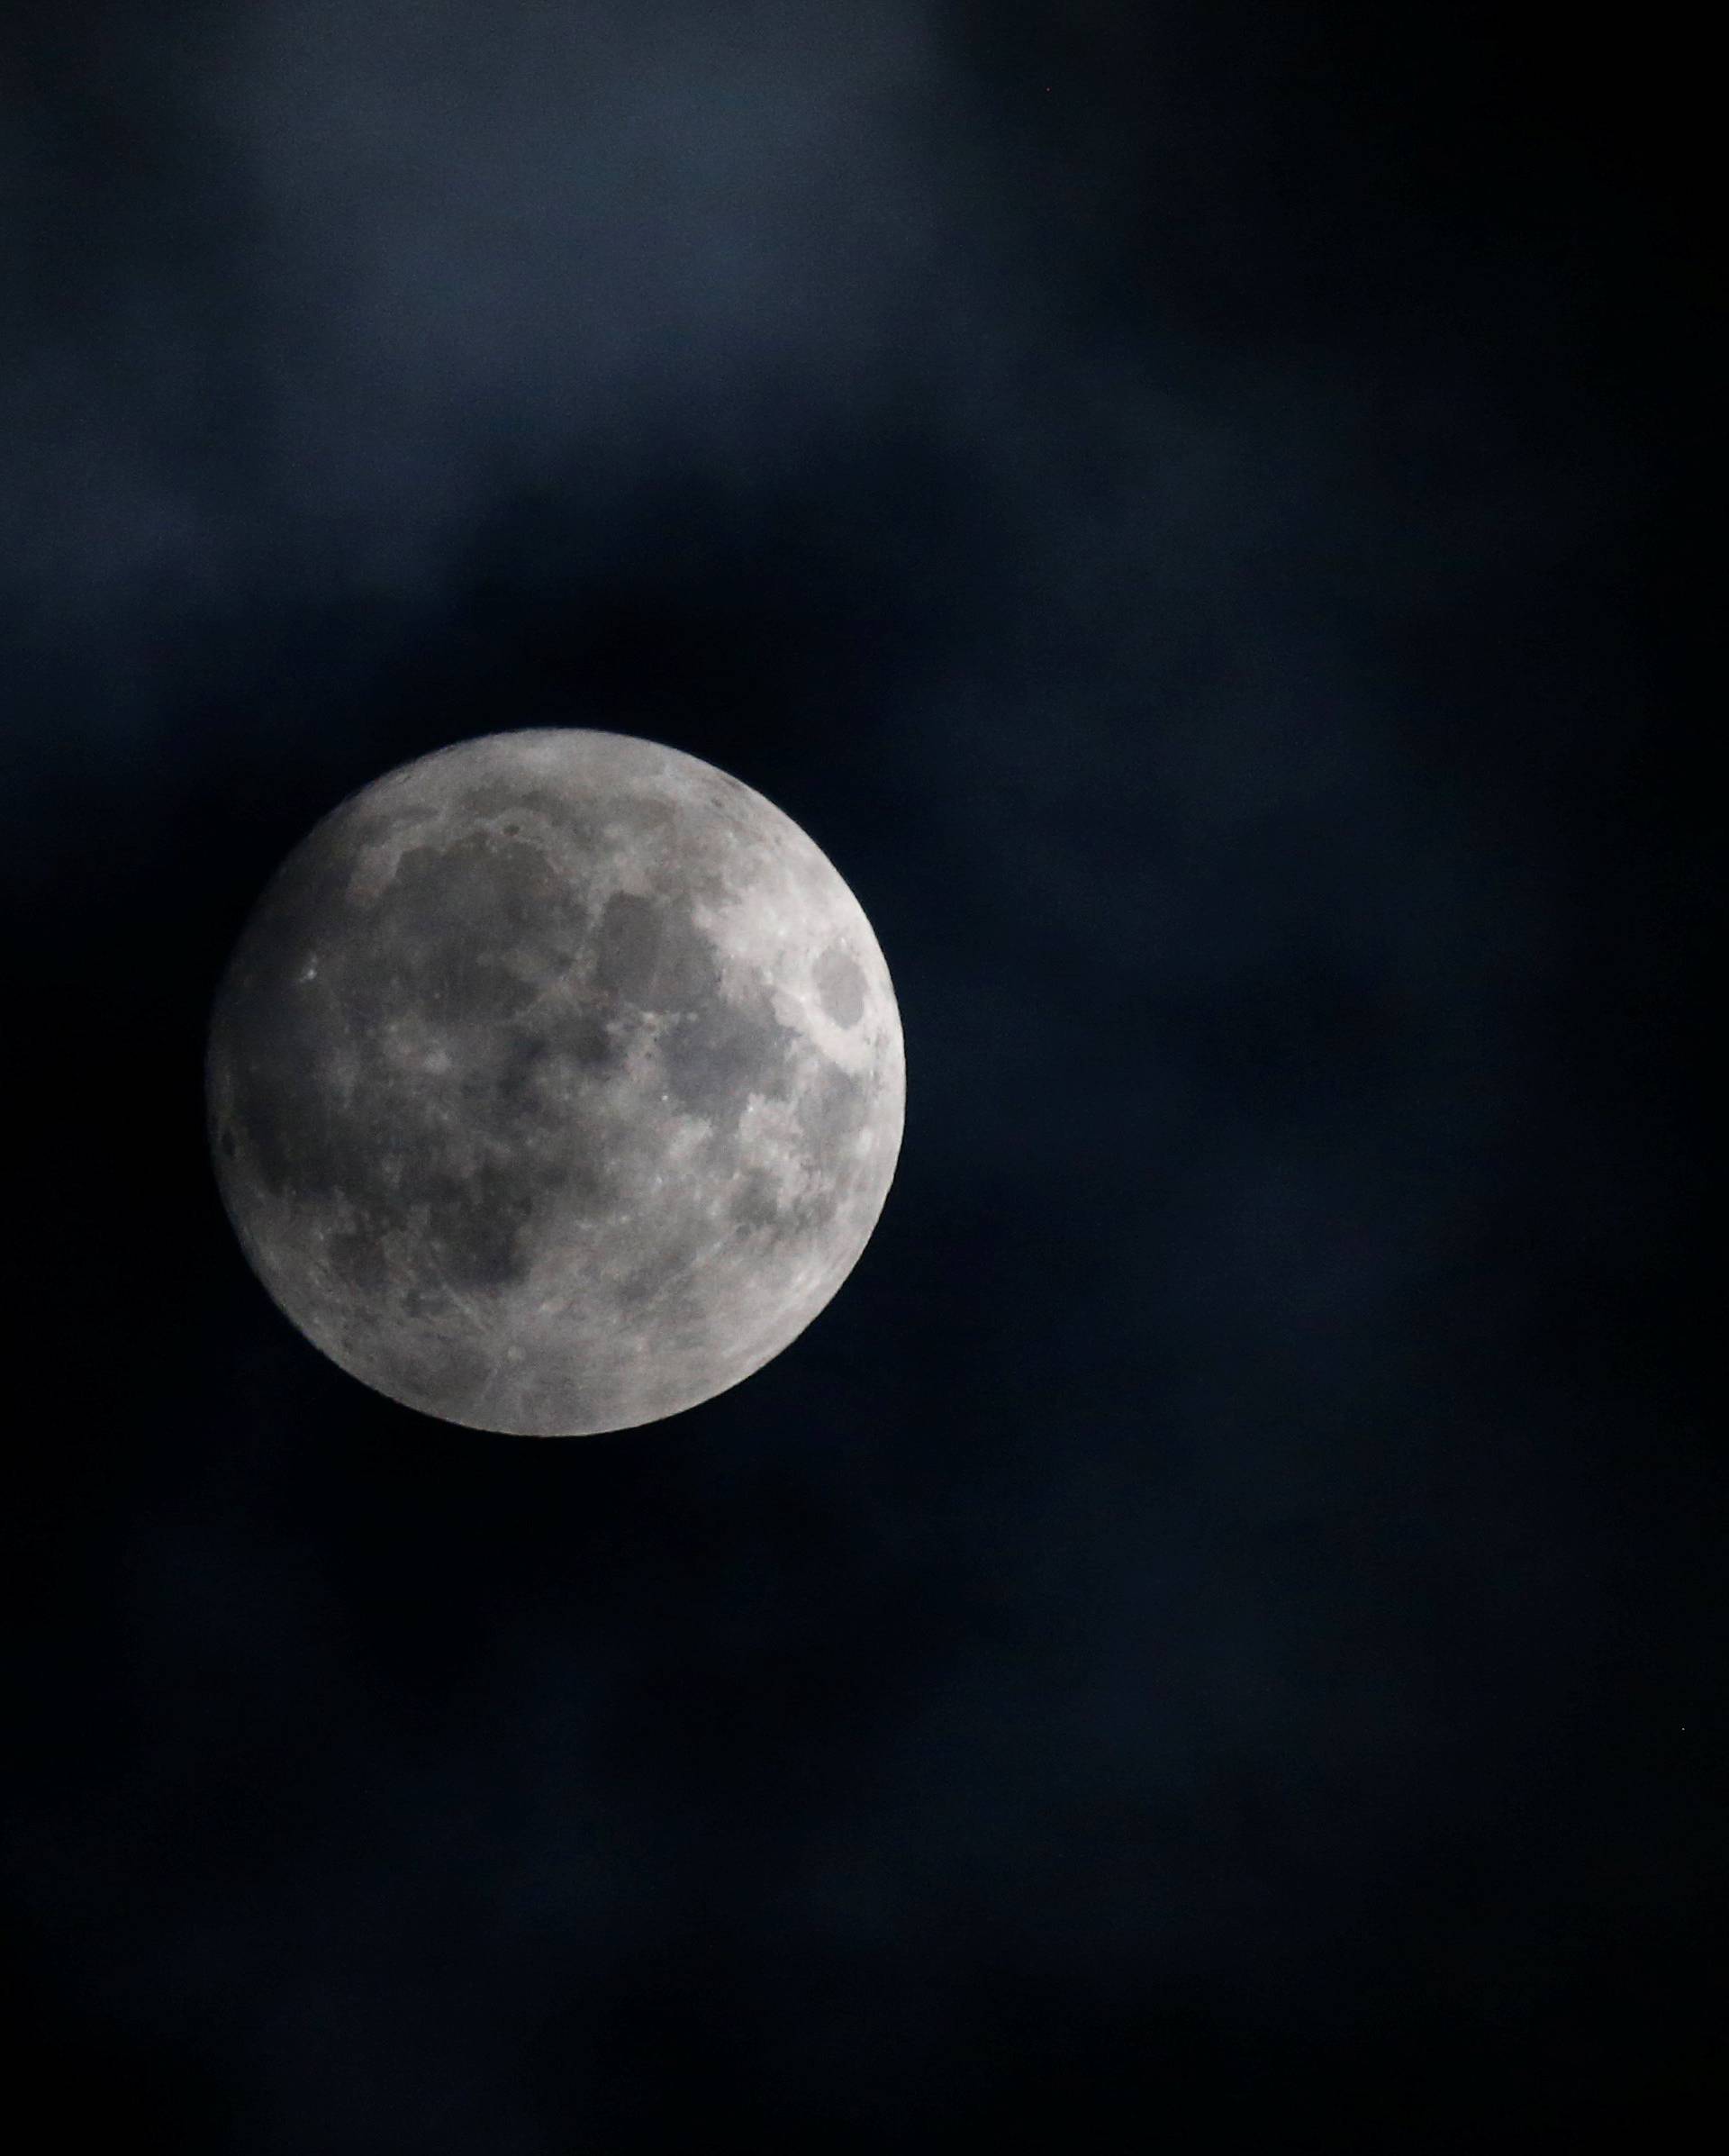 The moon appears in the sky a day before the "supermoon" spectacle in Vienna